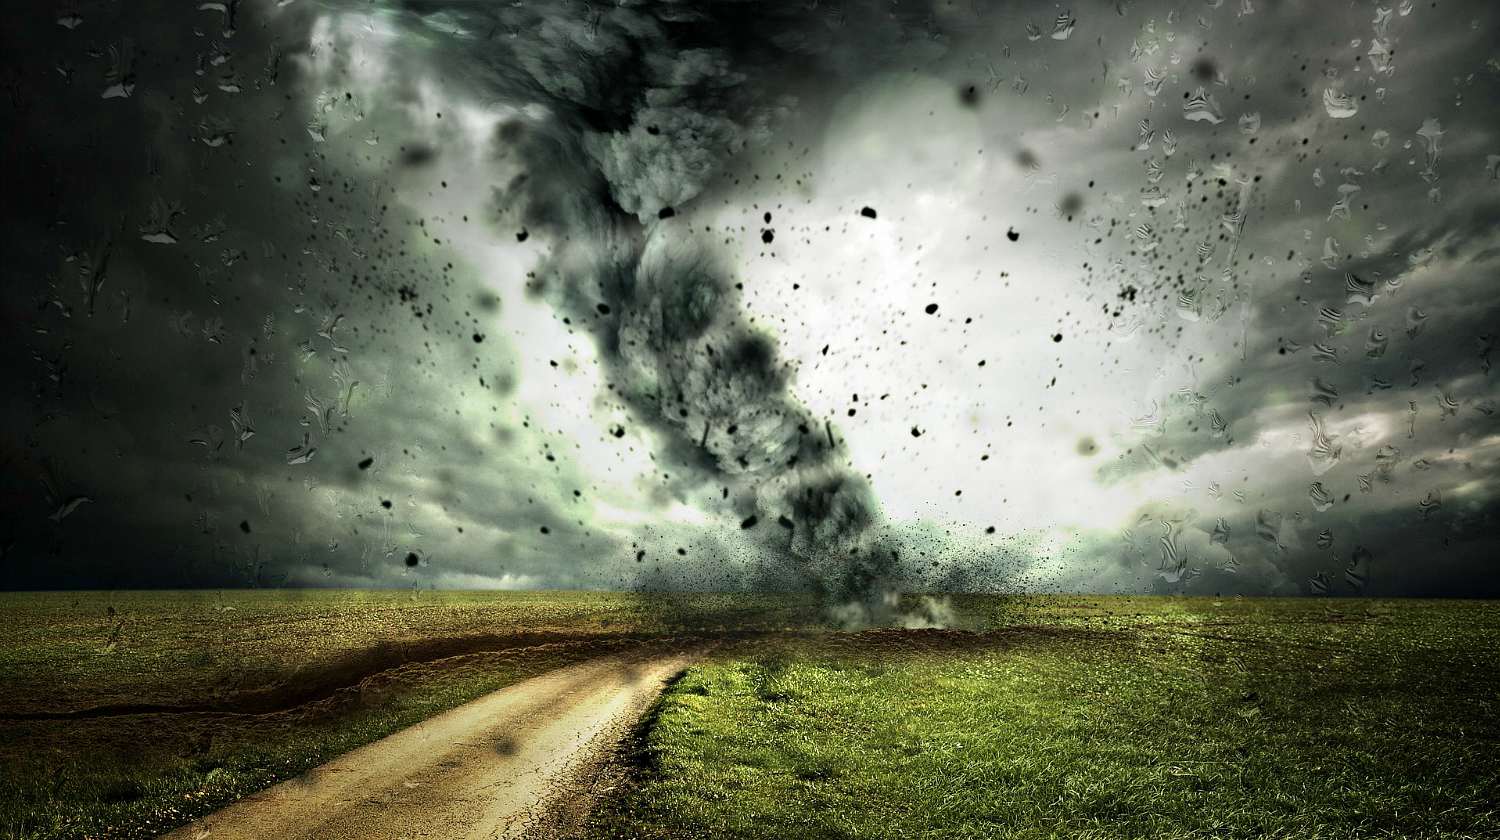 Featured | Hurricane tornado storm | Tornado Survival Tips: How To Survive Natural Disasters